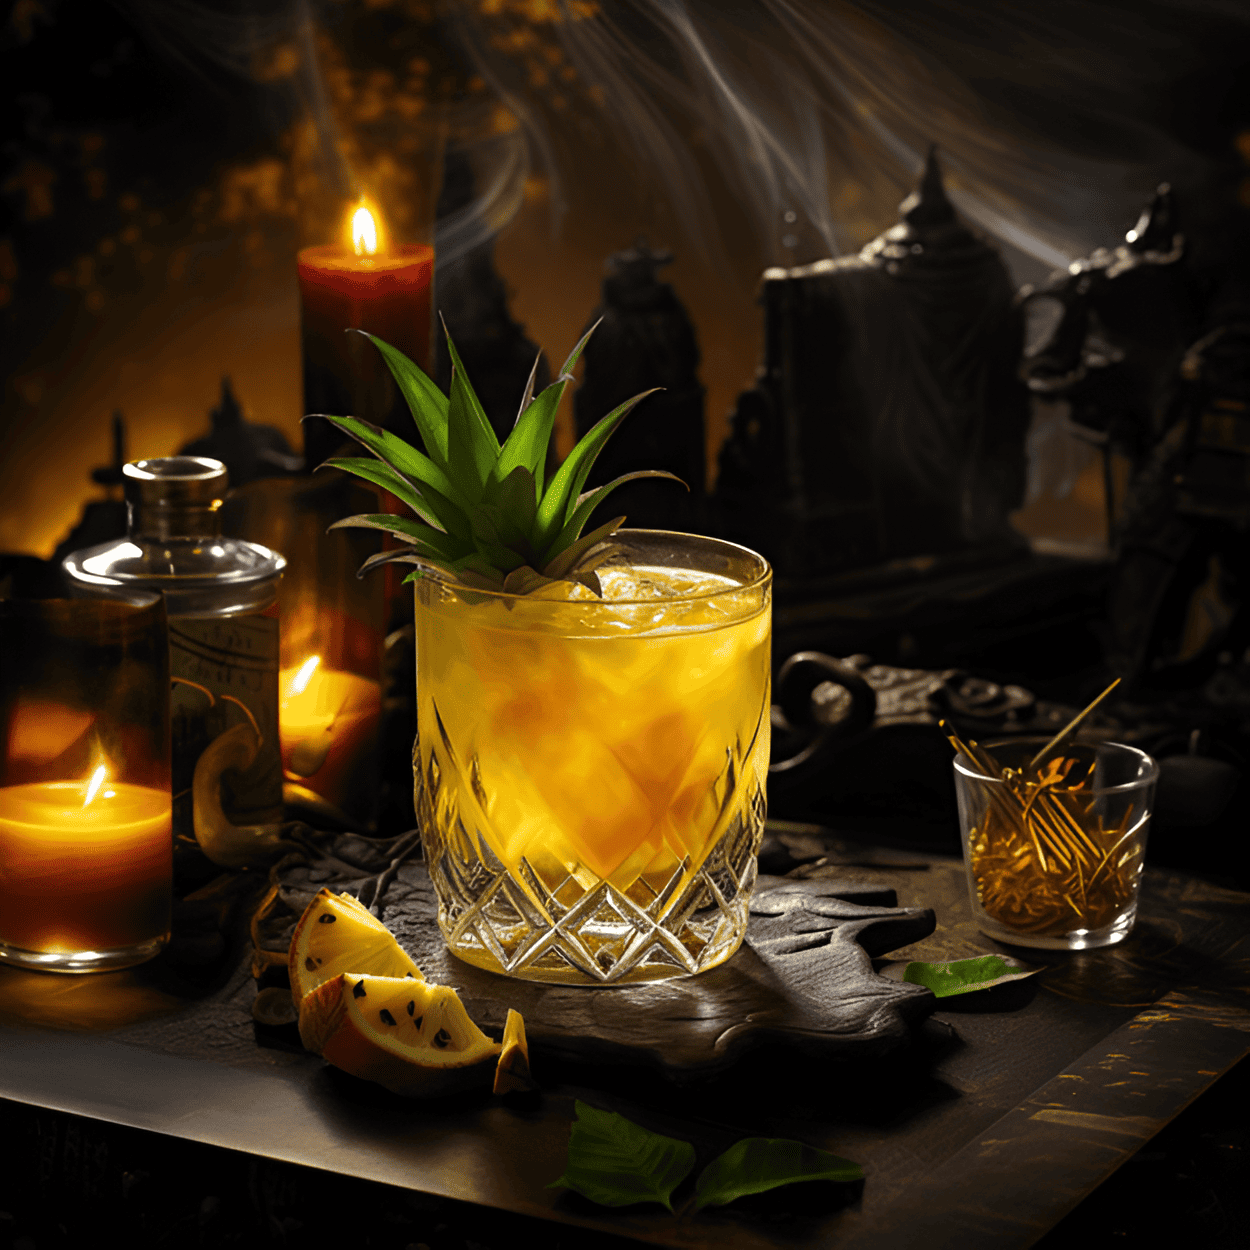 The Xanadu cocktail is a harmonious blend of sweet, sour, and fruity flavors, with a hint of spice. The combination of tropical fruits and exotic spices creates a unique and refreshing taste that is both bold and delicate.